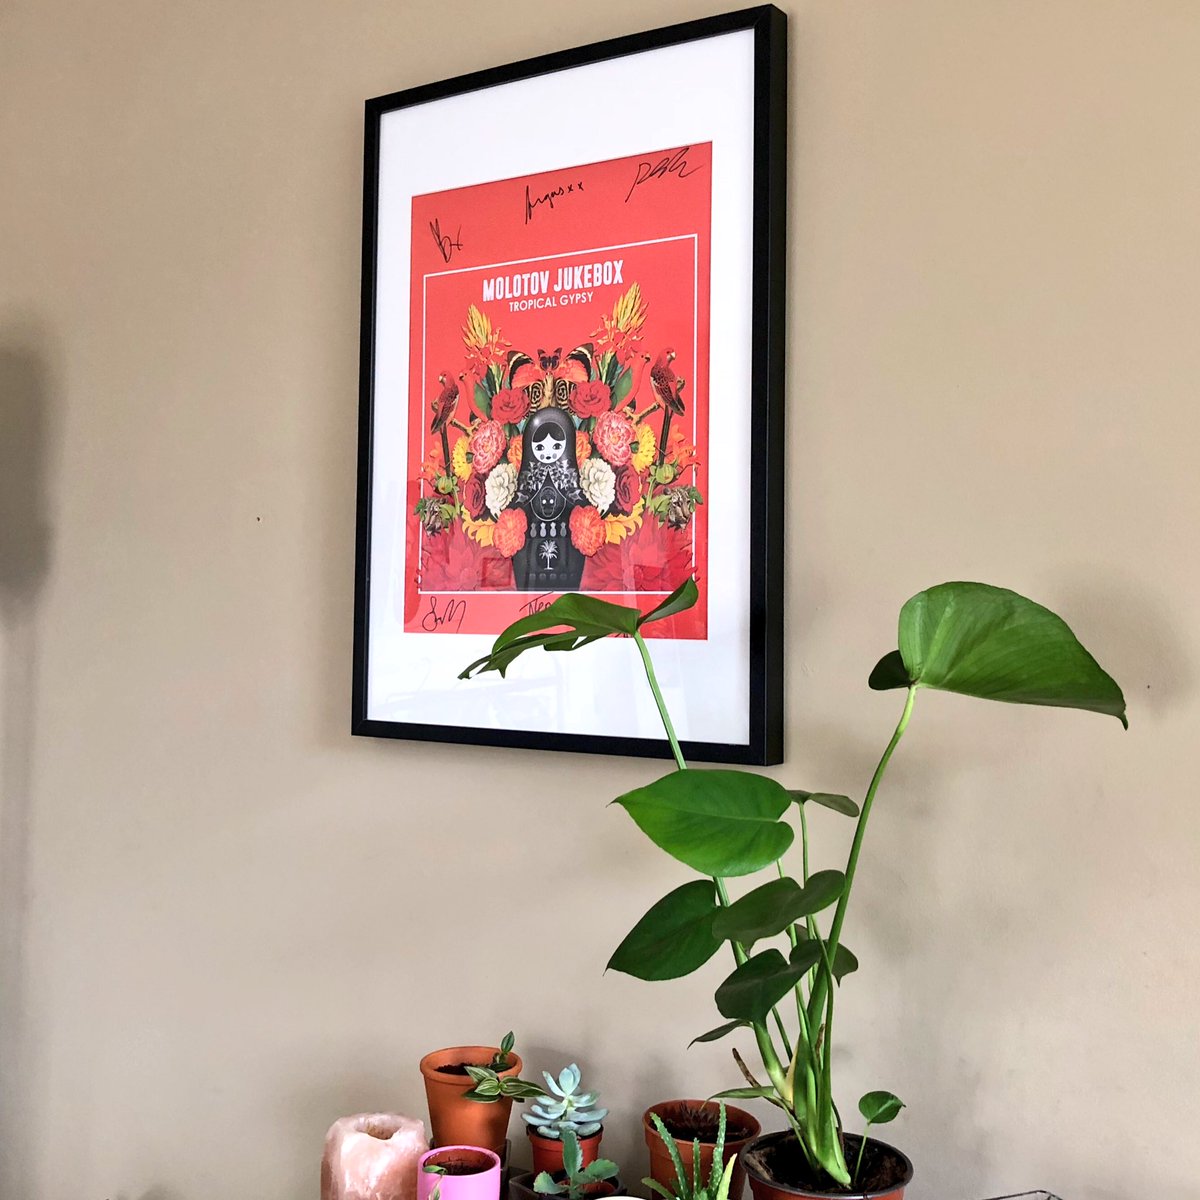 My new #swisscheeseplant is perfect next to my @Molotov_Jukebox #tropicalgypsy poster 👌🍍

Looking forward to seeing them next month!